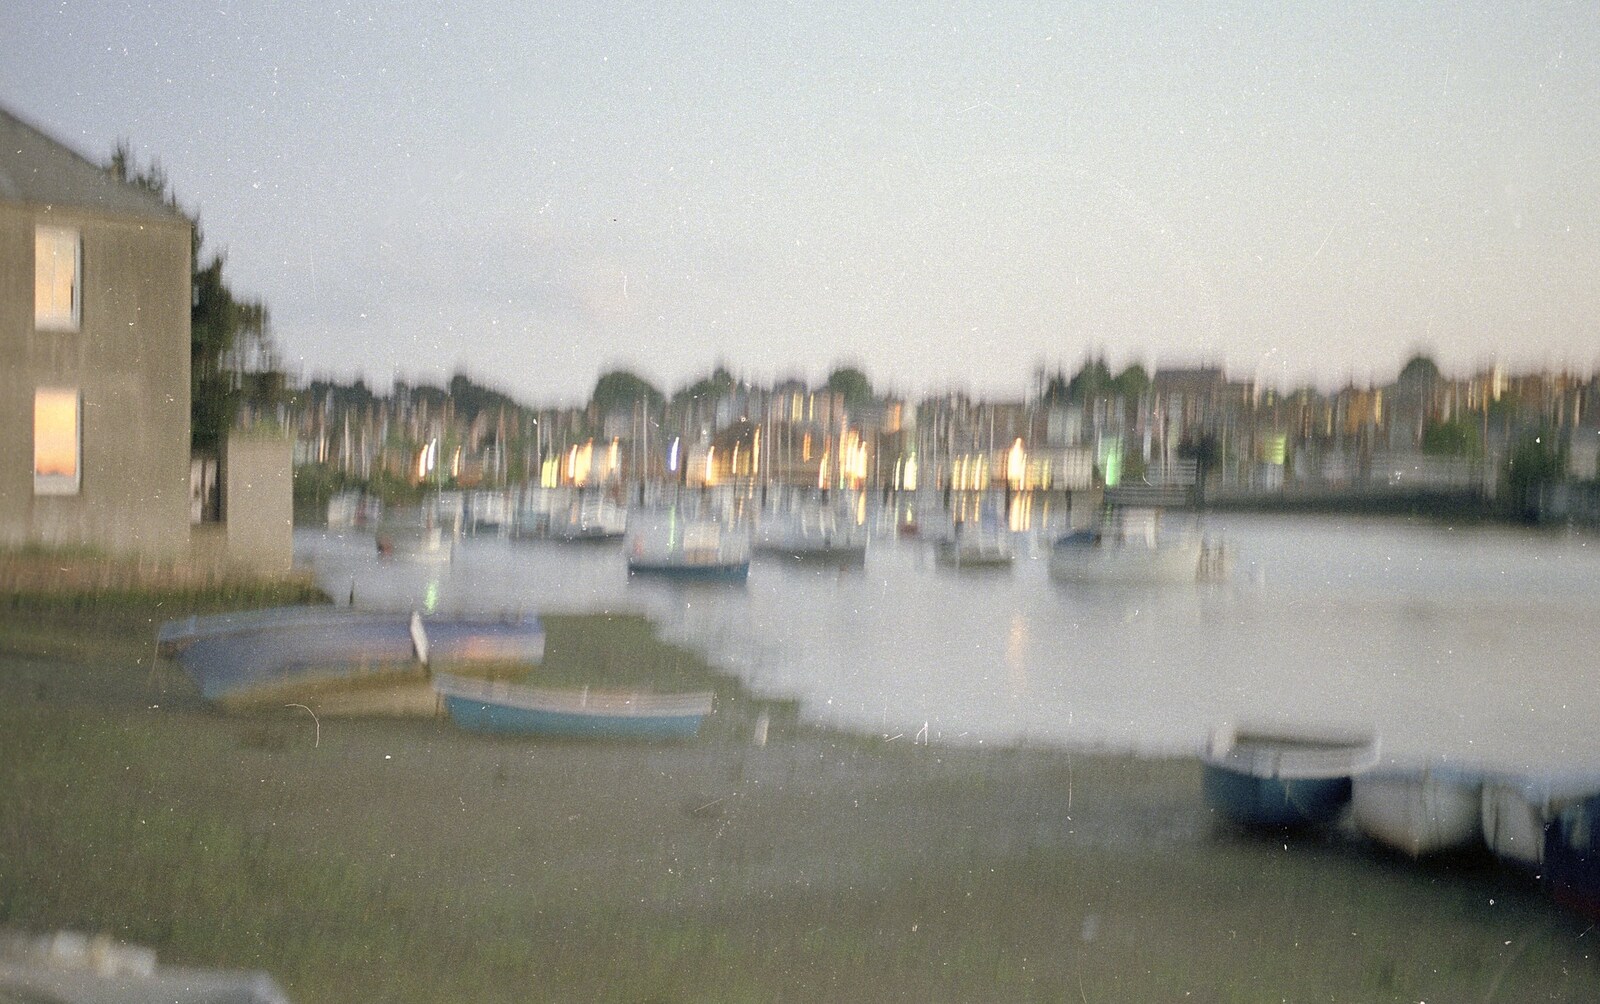 A blurry but tantalising photo of a harbour from Brockenhurst College Exams and Miscellany, Barton on Sea, Hampshire - 10th June 1985